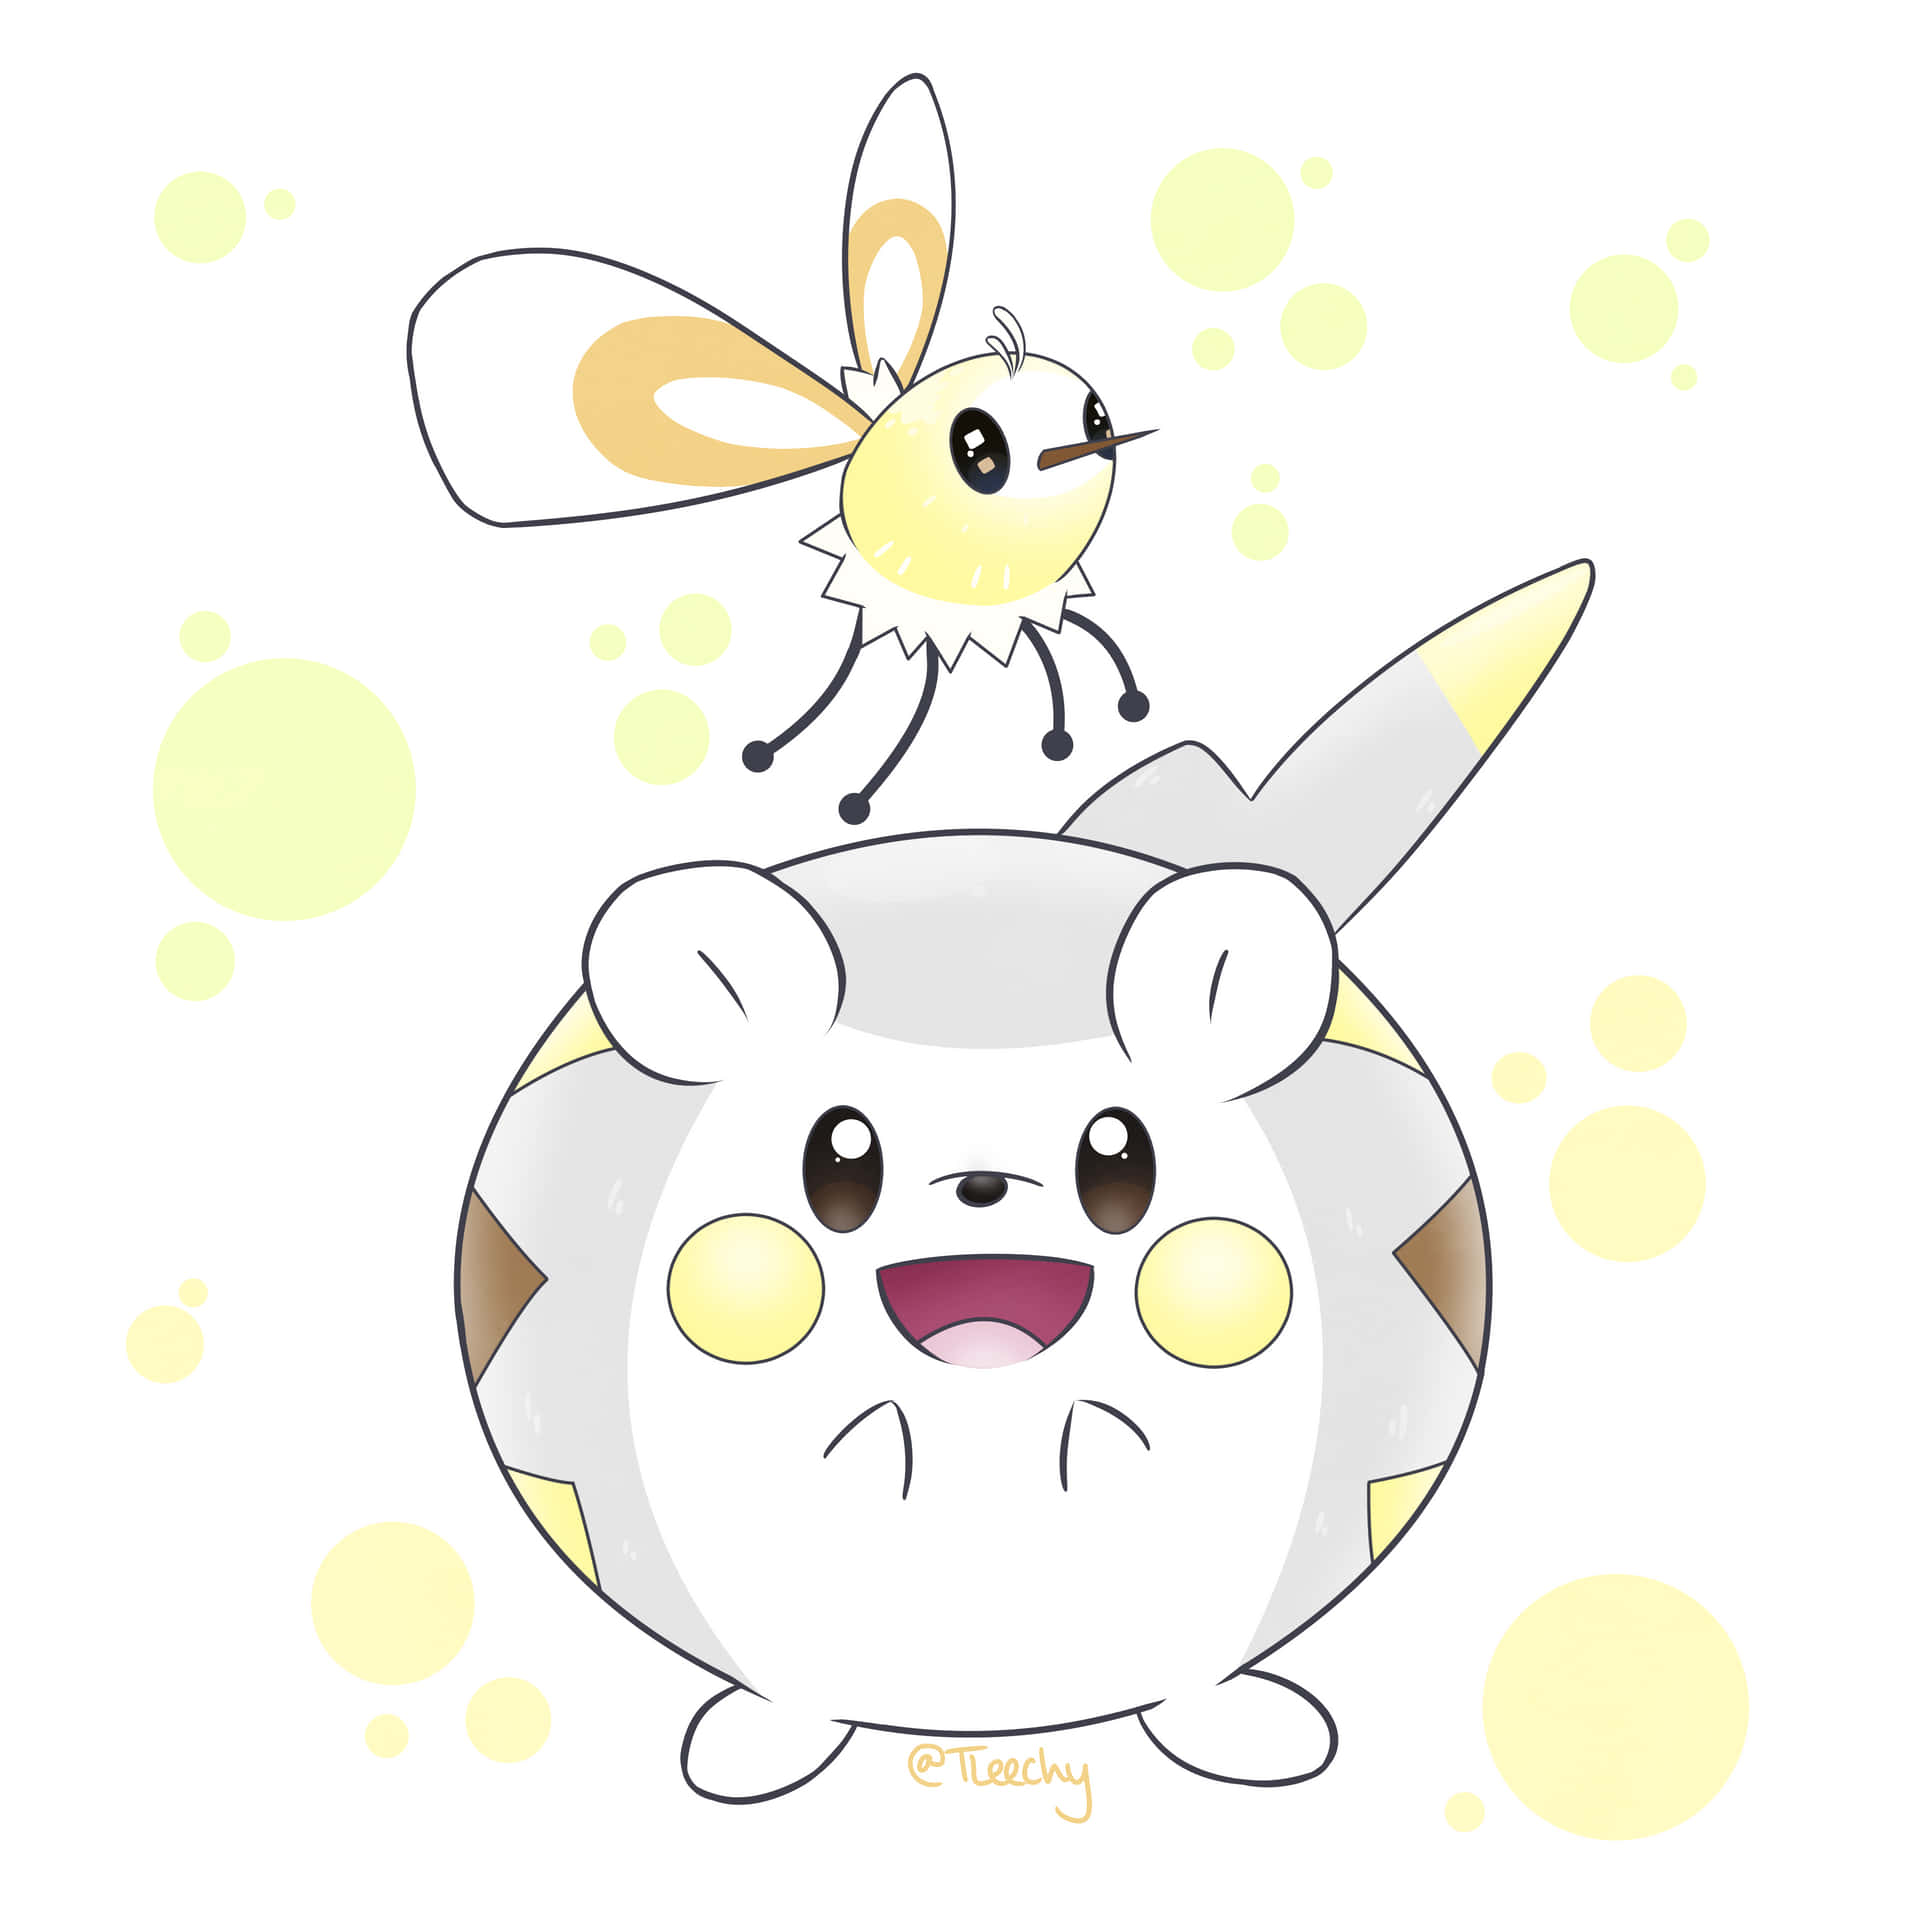 Cutiefly And Togedemaru Wallpaper